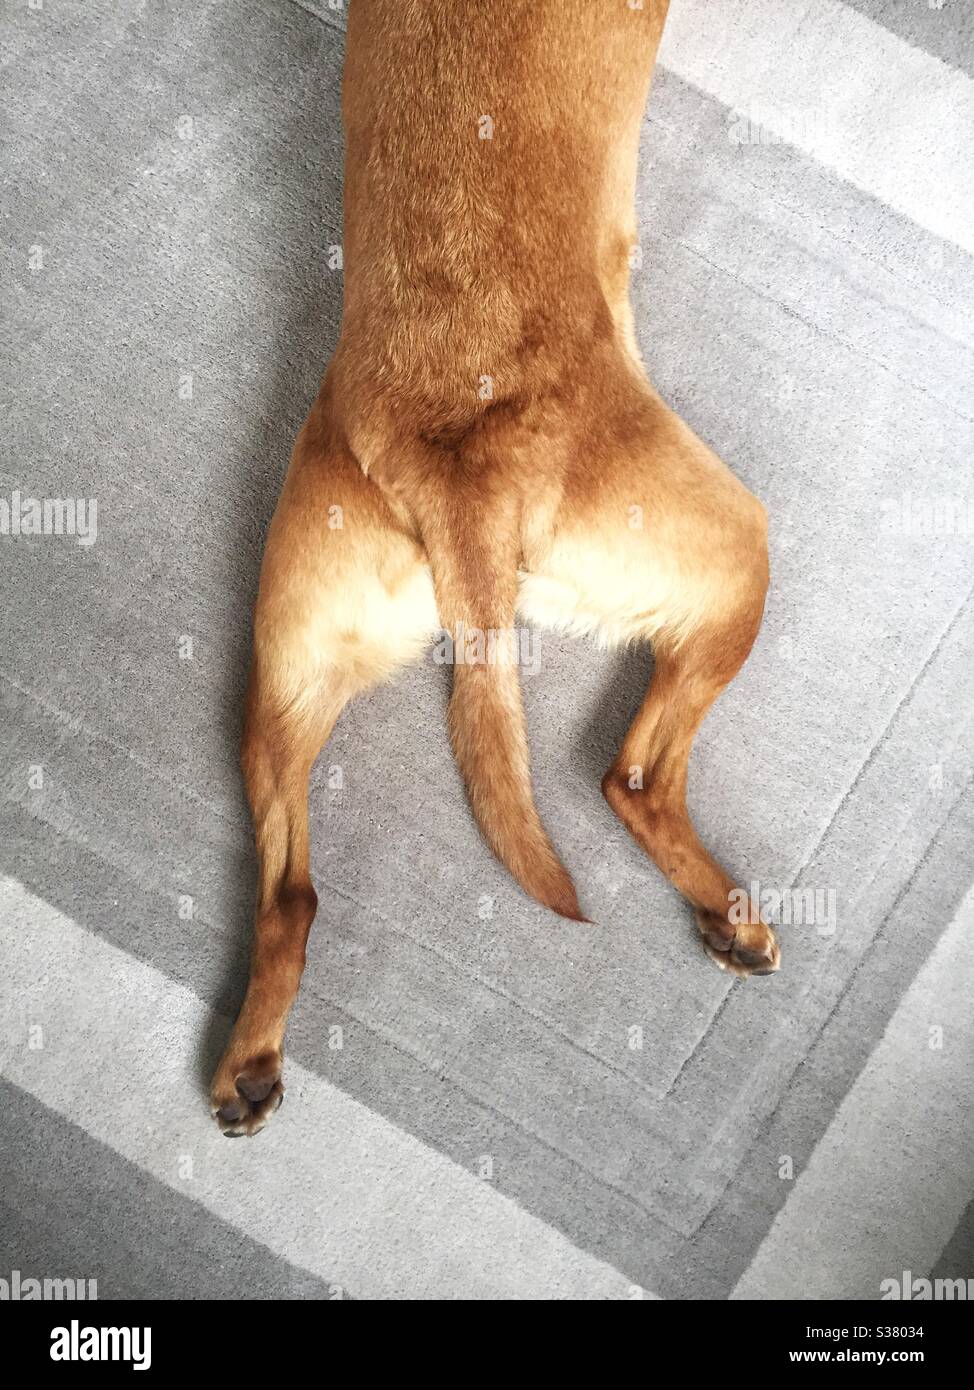 Looking down from above onto the outstretched hind legs of a dog doing a sploot with tail between its legs Stock Photo